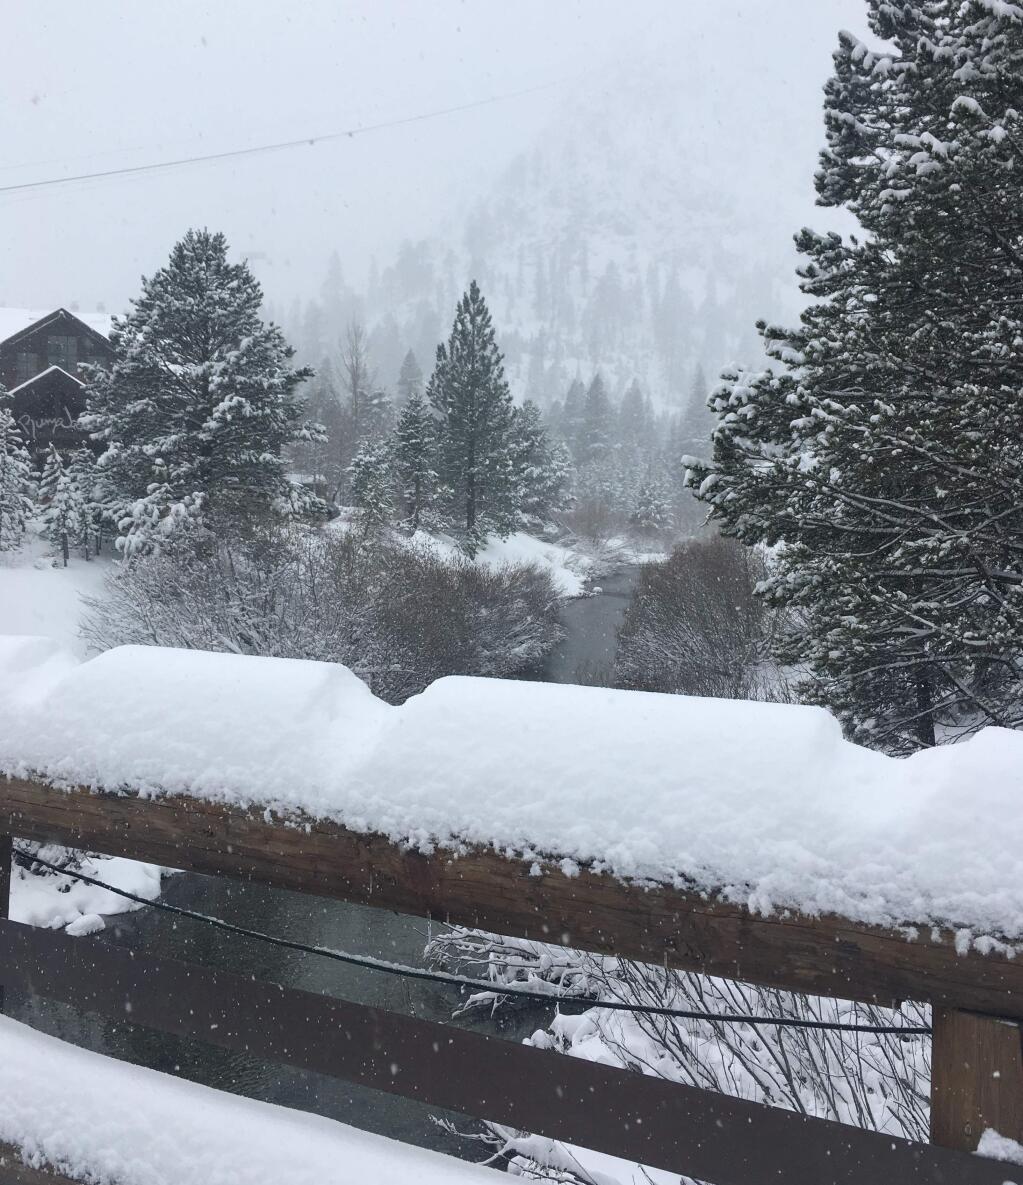 Snow at Squaw Valley on Monday, April 16, 2018. (COURTESY OF SQUAW VALLEY ALPINE MEADOWS)